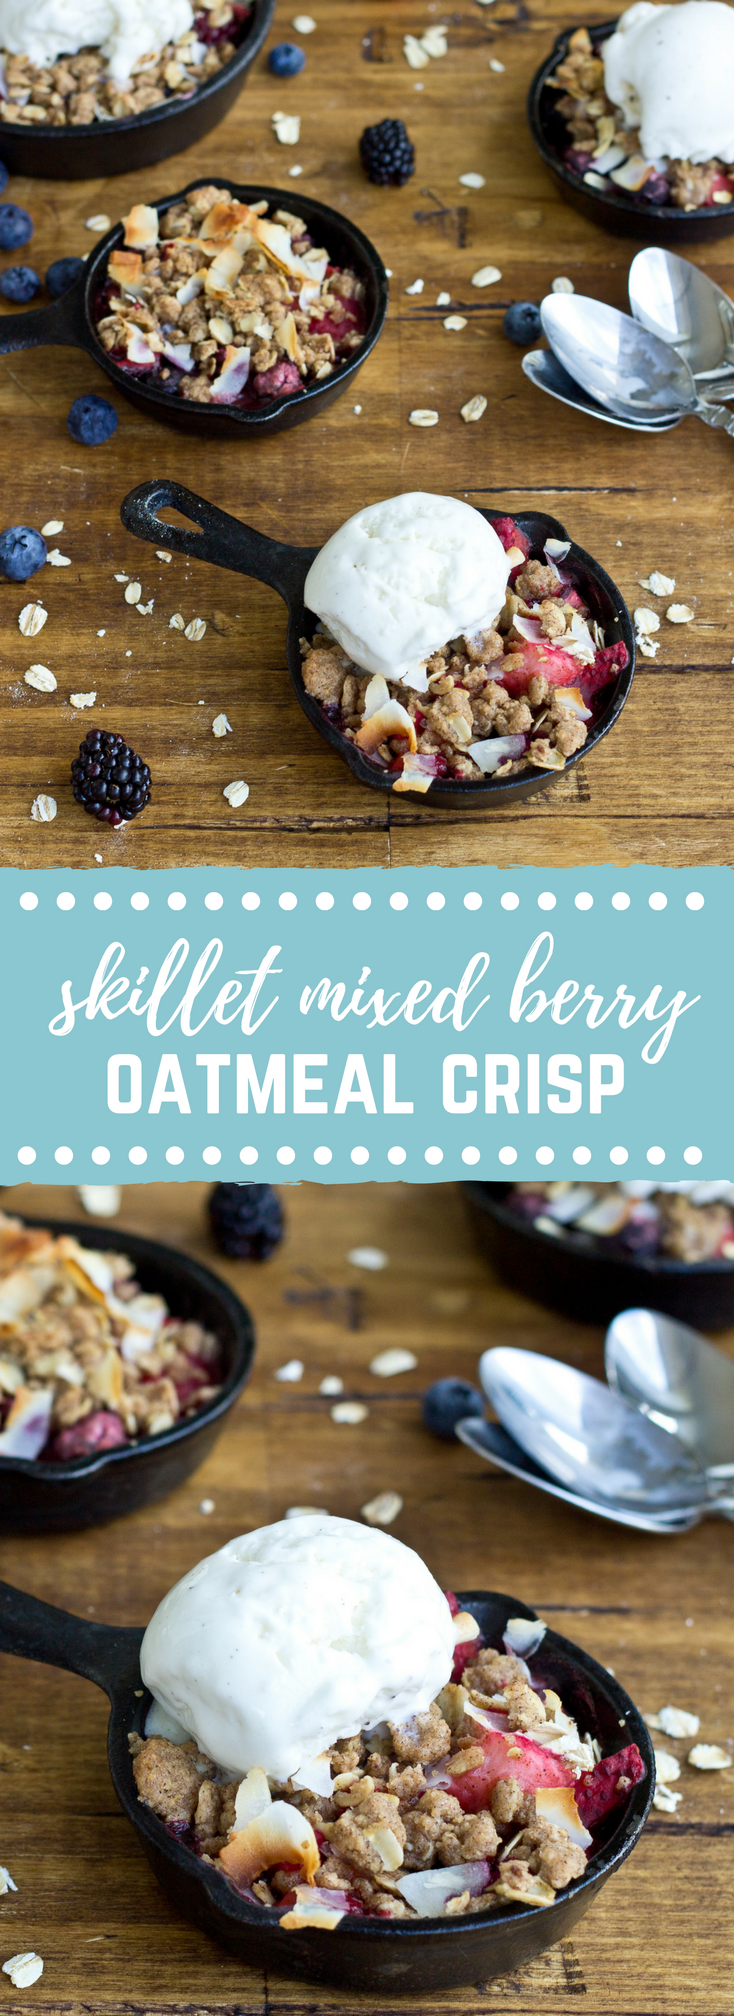 Soak up the last of summer with this Skillet Mixed Berry Oatmeal Crisp. Blueberries, raspberries, strawberries, and blackberries nestled under a warm oatmeal crisp topping and a scoop of Breyers® Natural Vanilla ice cream. So good!